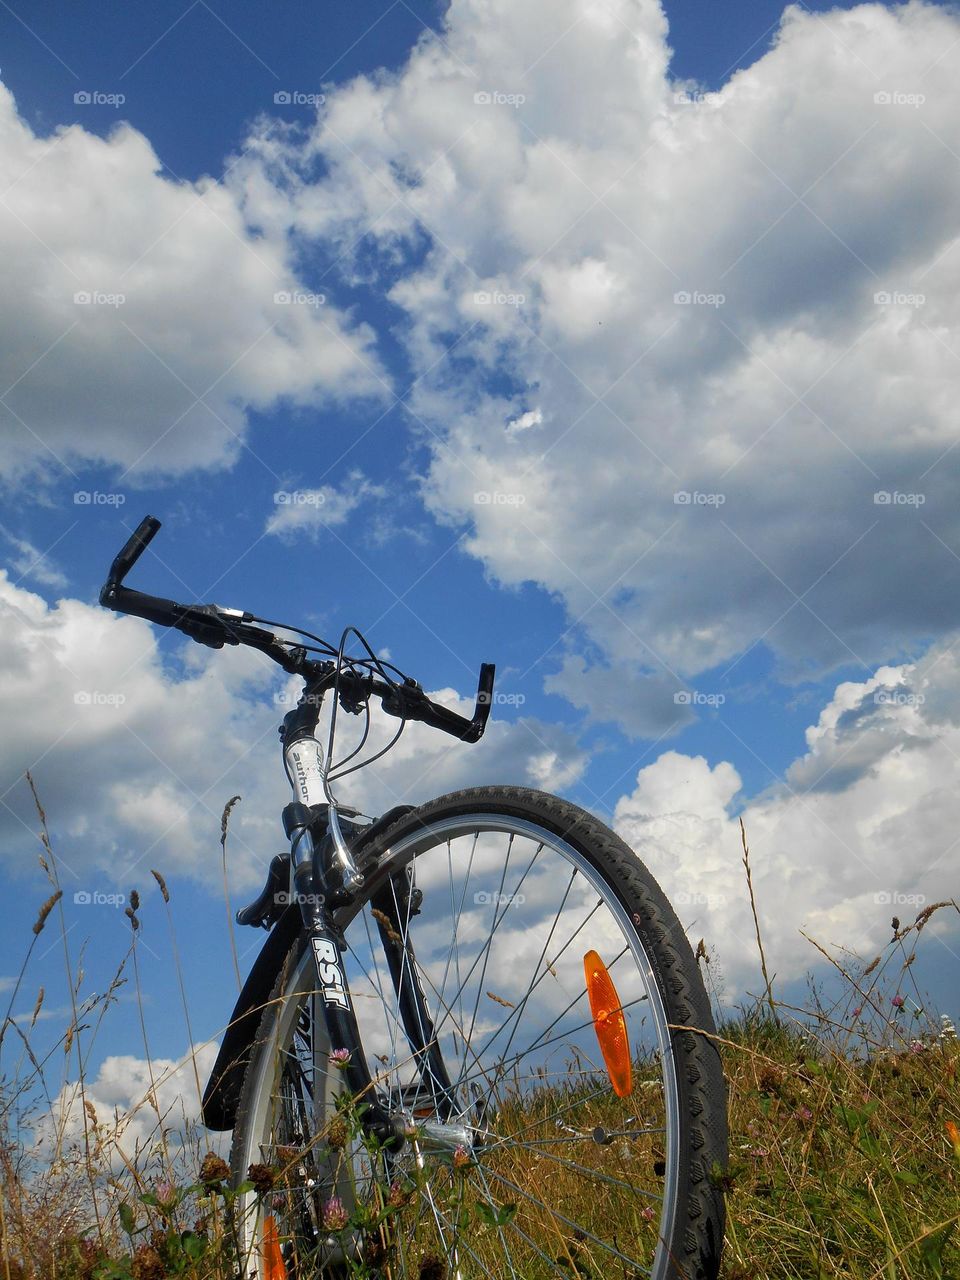 bike on a nature blue sky clouds background lifestyle